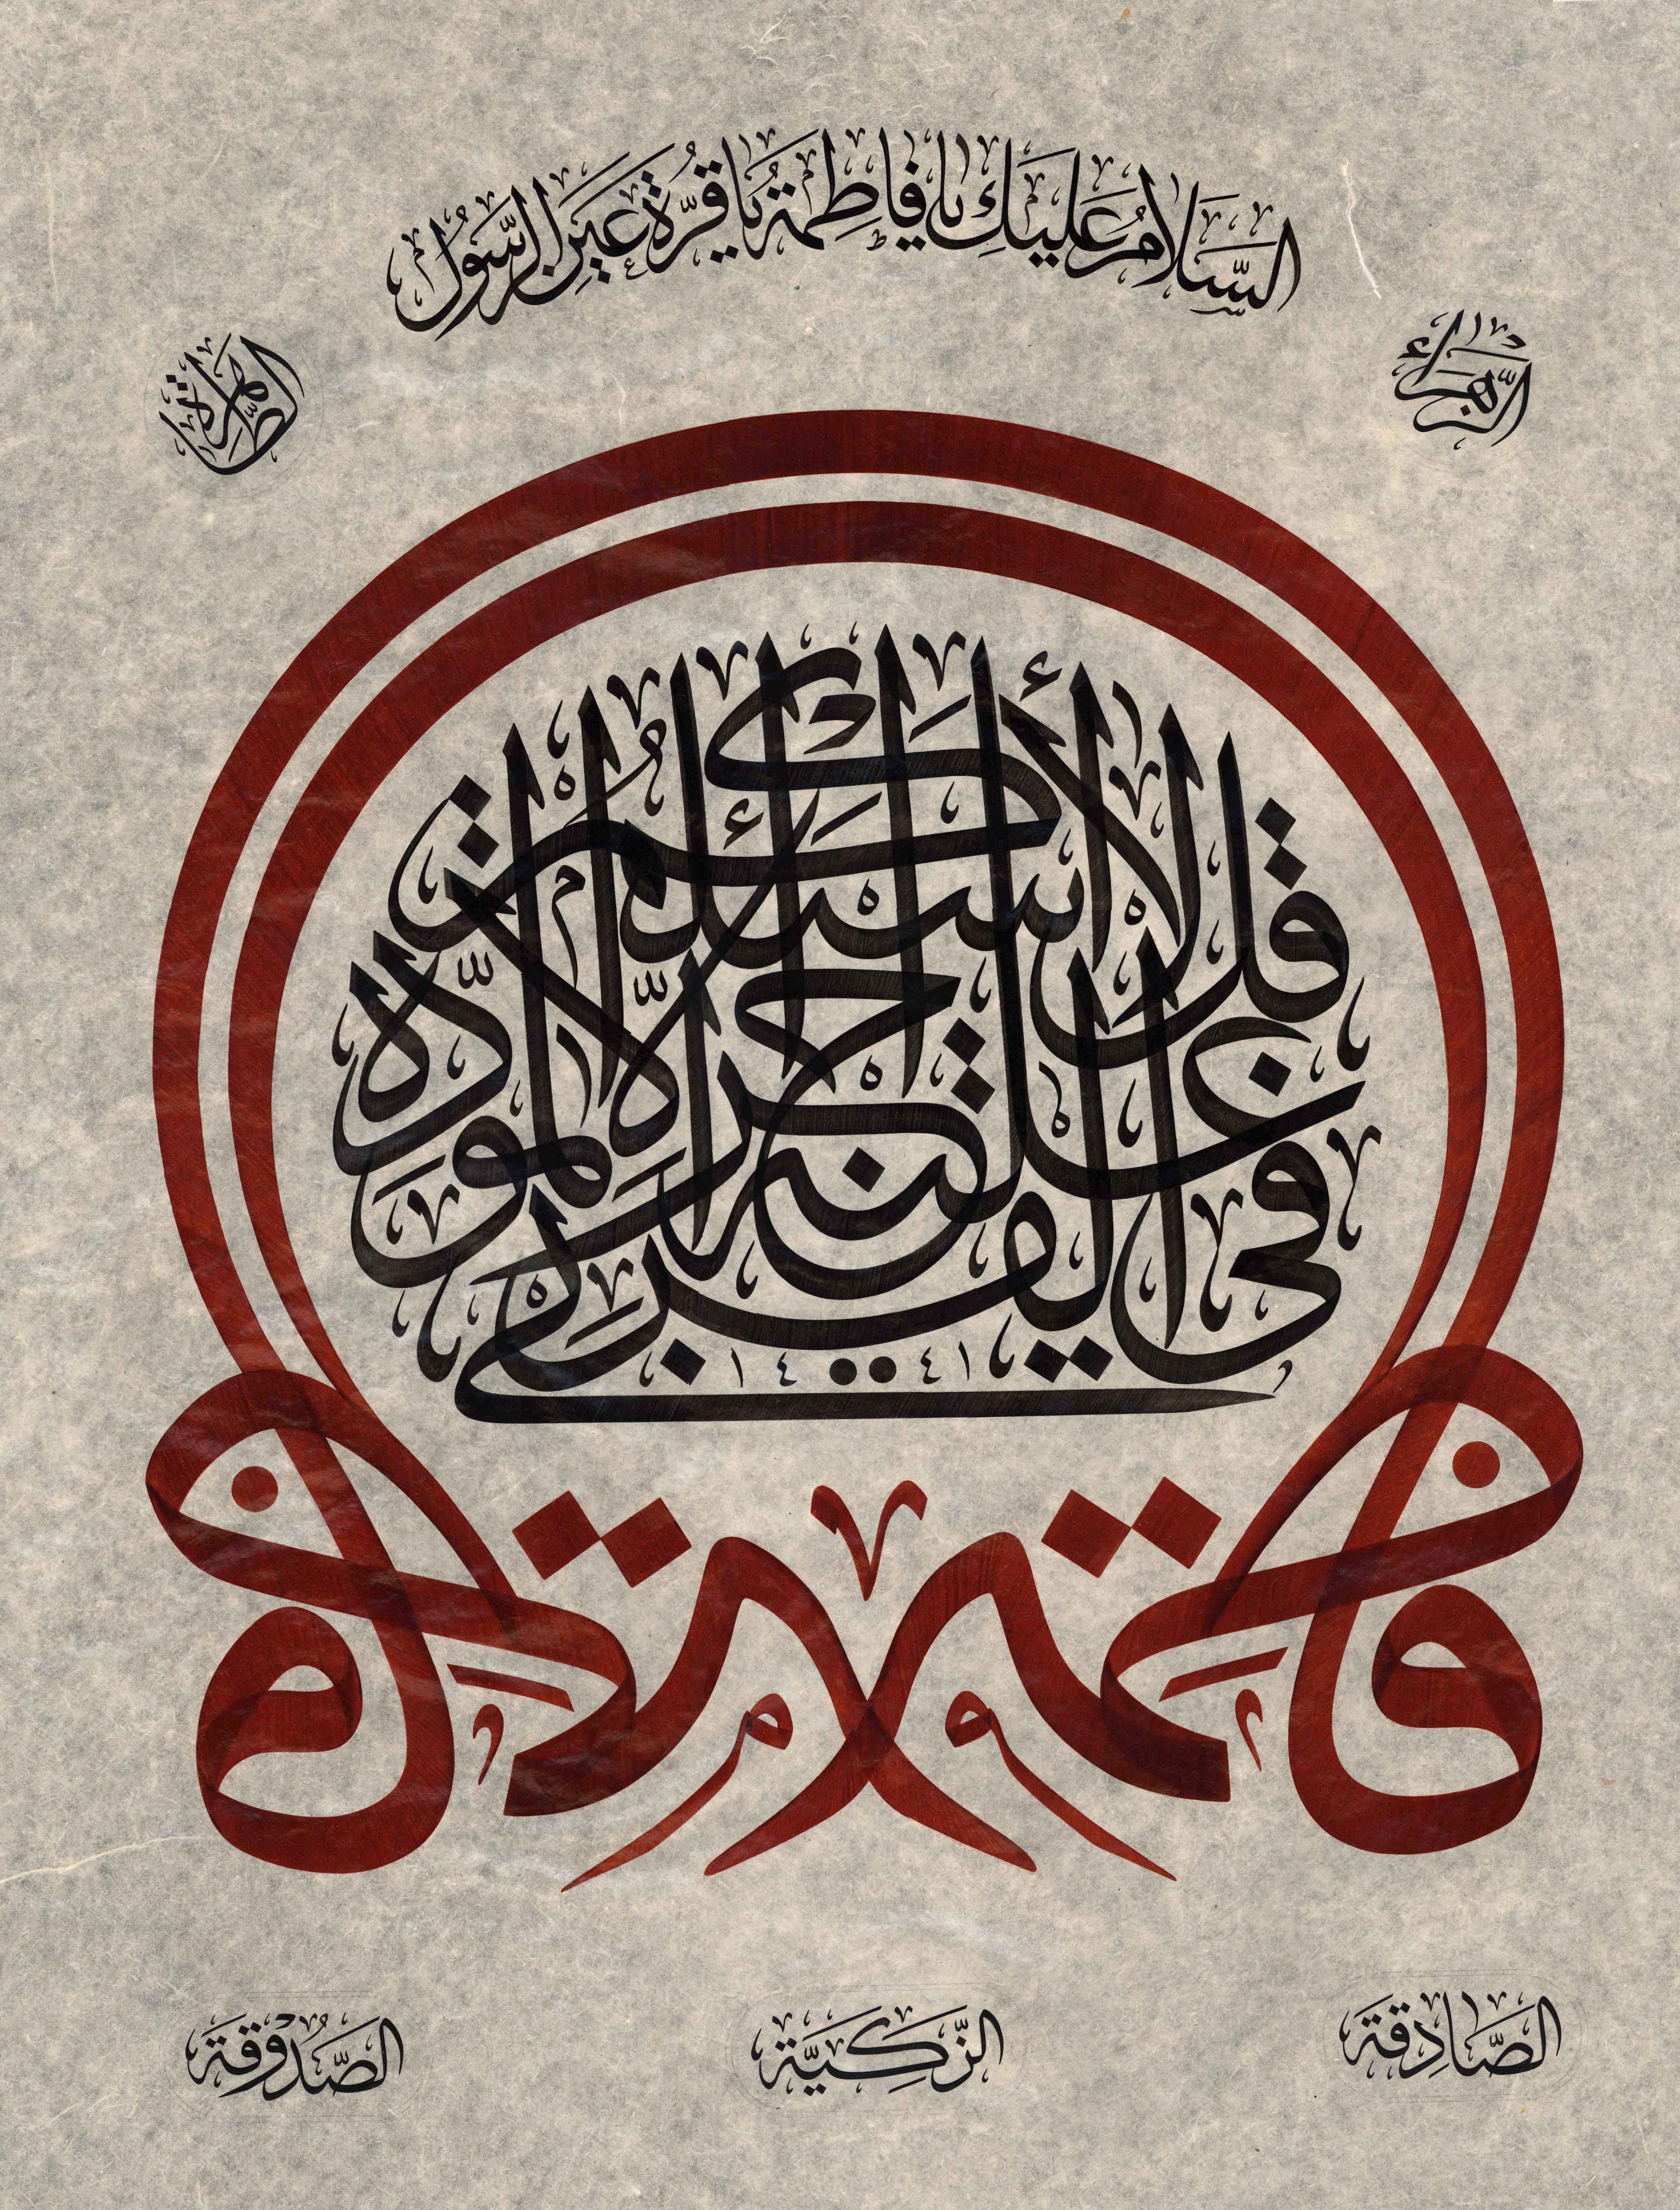 The winners of the appreciation award in the brief-text section written in Thuluth font